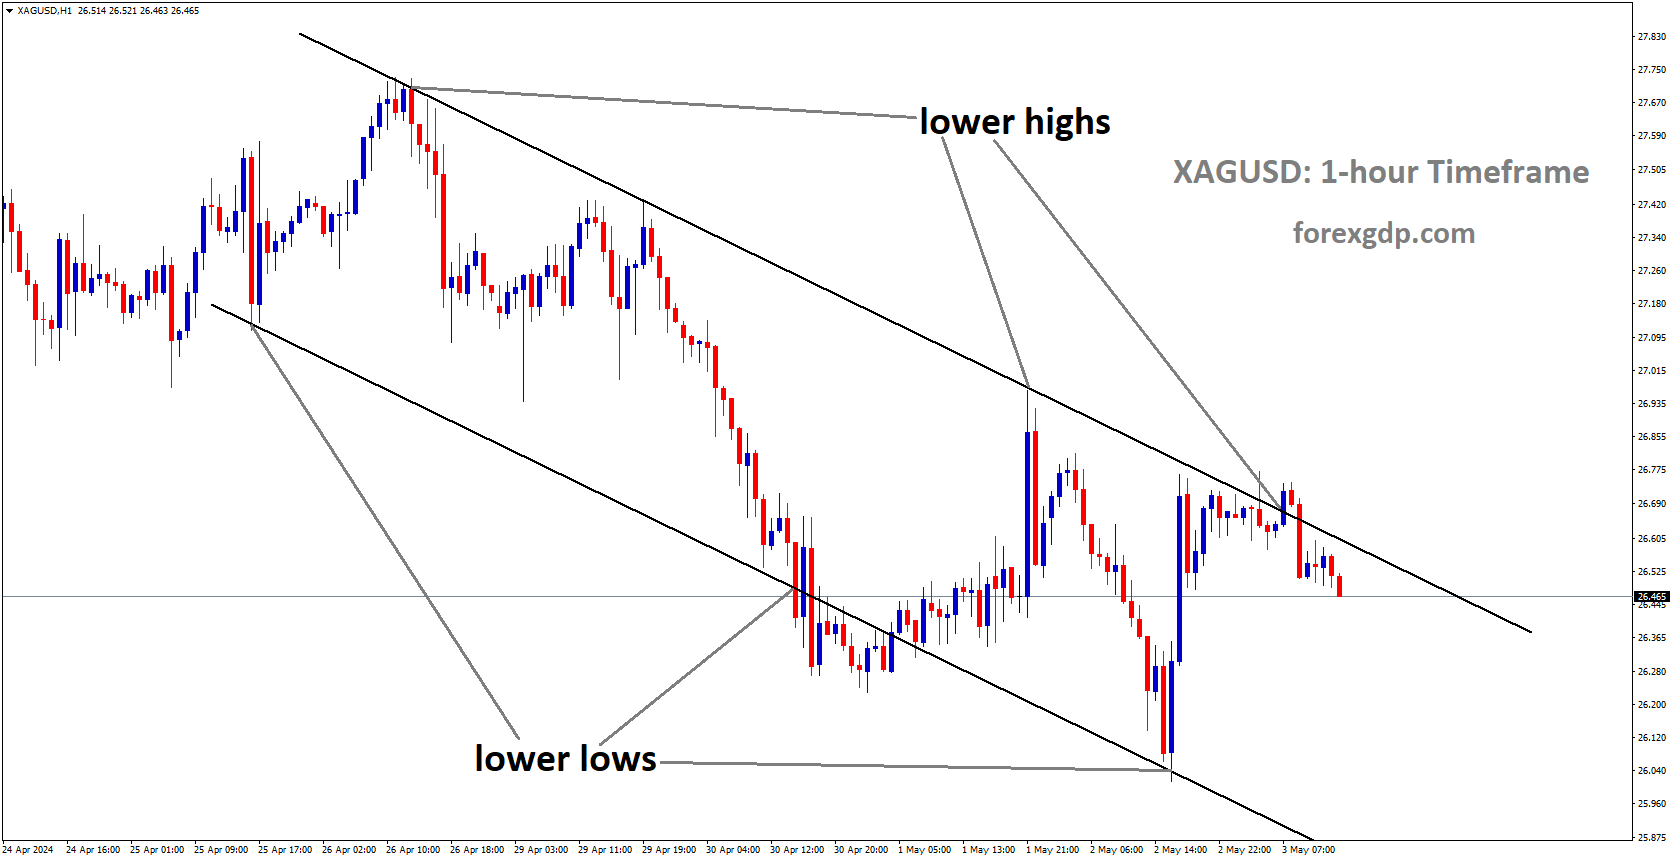 XAGUSD is moving in Descending channel and market has fallen from the lower high area of the channel